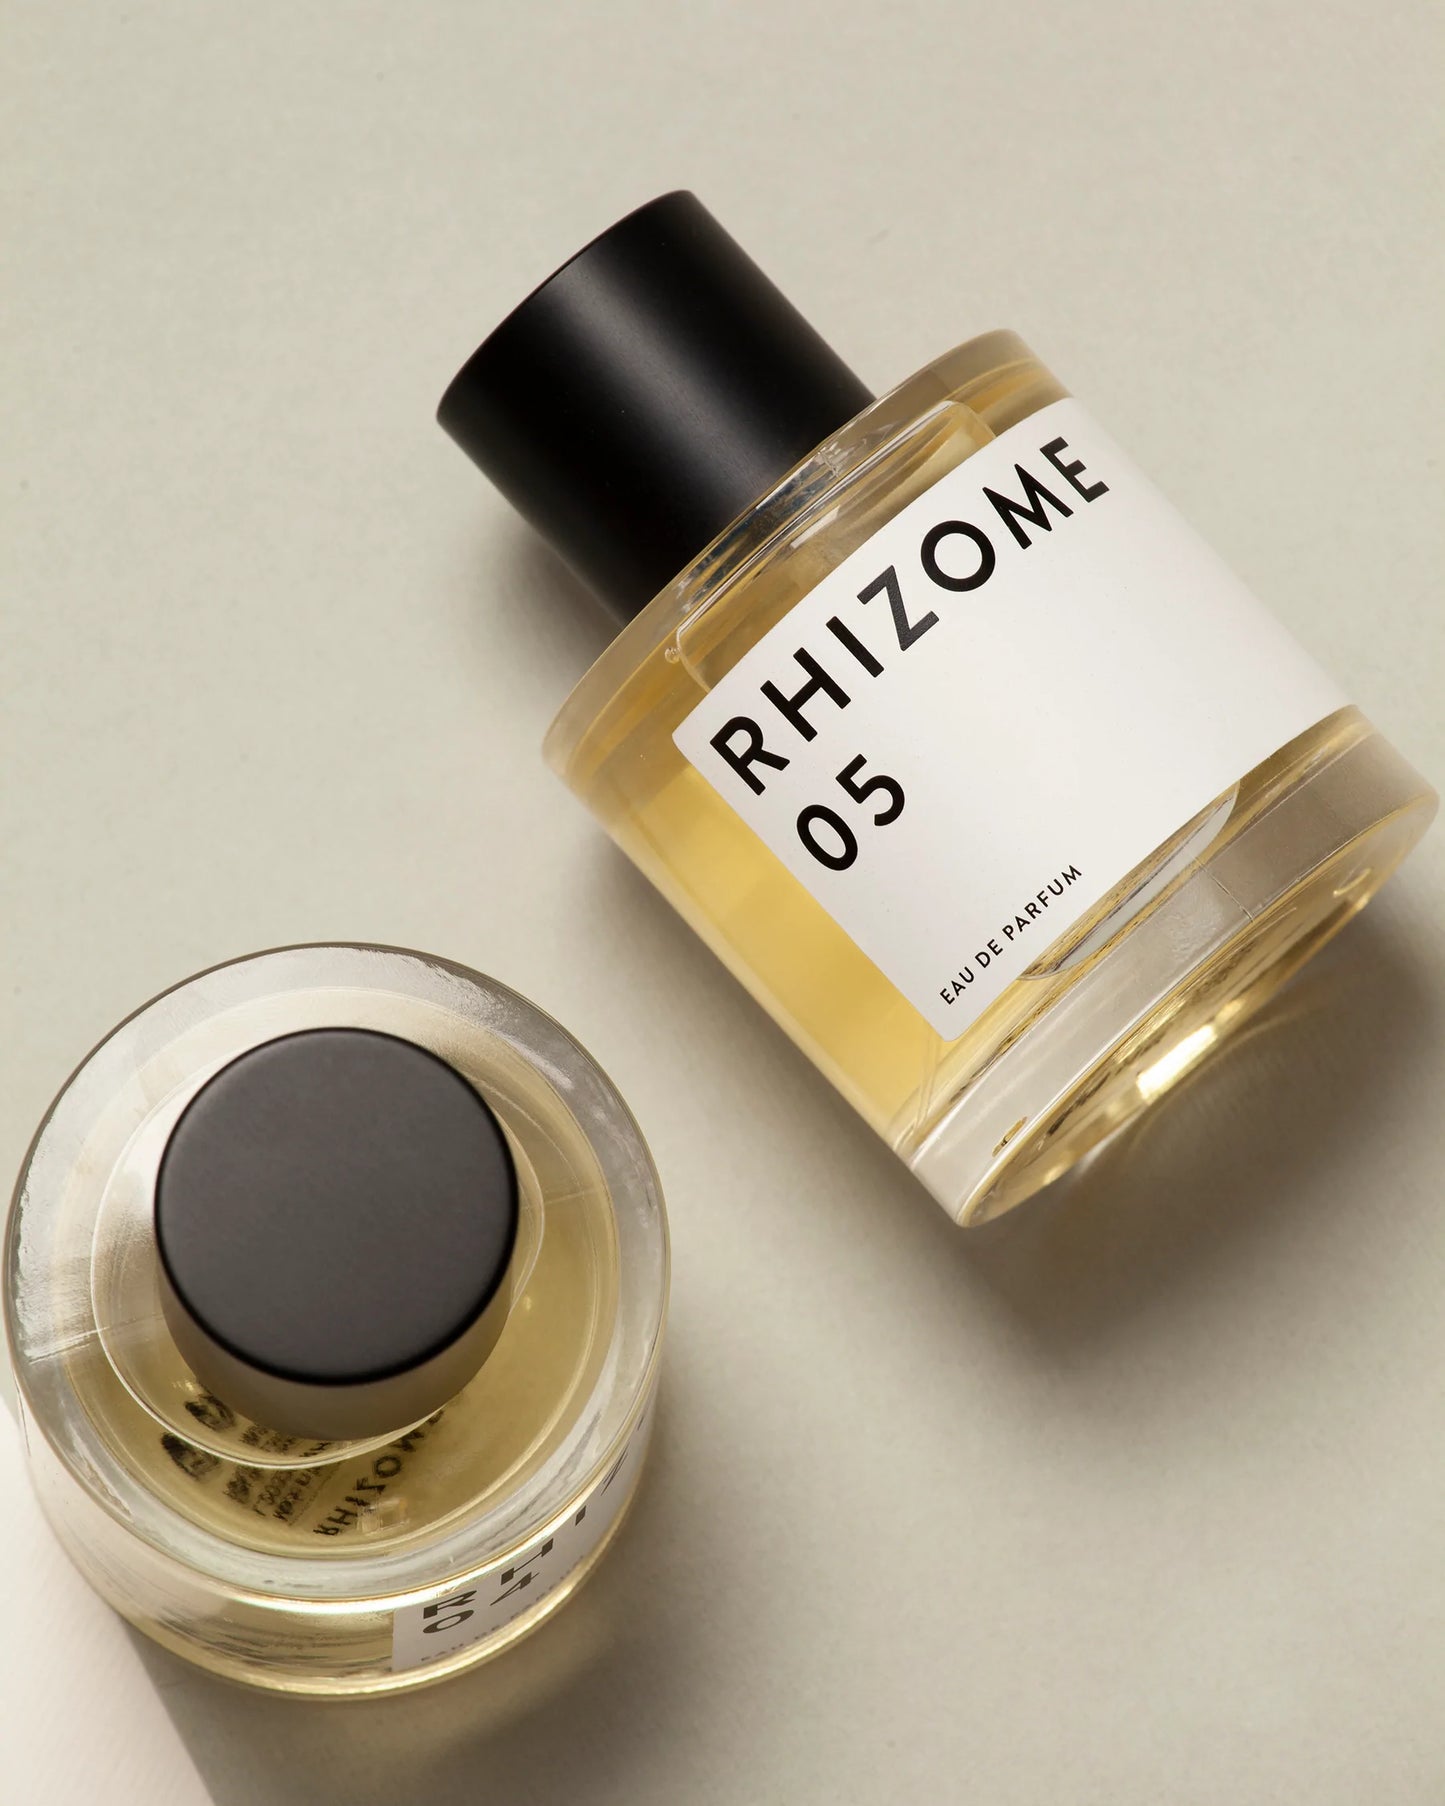 A rich and persistent perfume that represents faraway landscapes and environments.